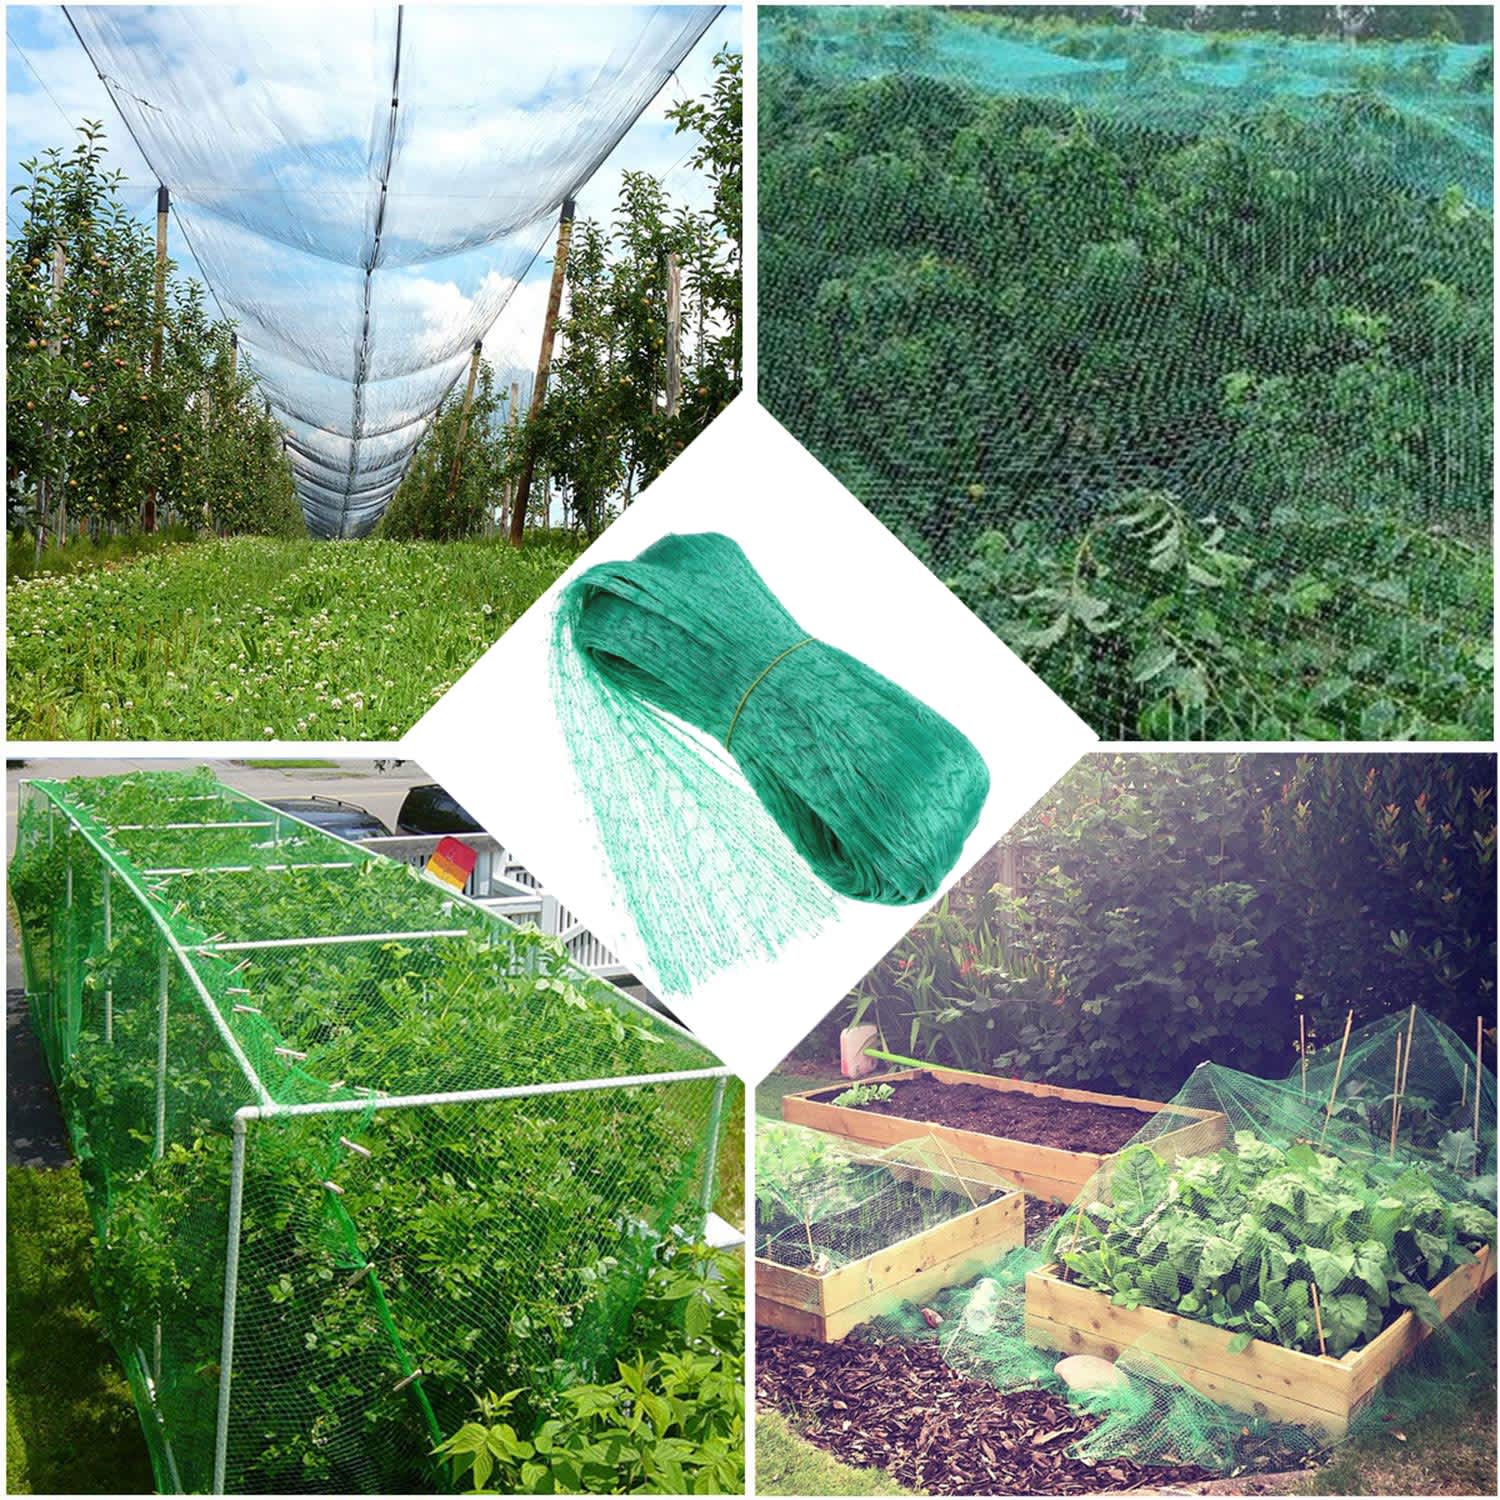 WANIAN Outdoor Mesh Rope Climbing Netting Heavy Duty Trampoline Container Freight Plant Home Retro Decoration Gardening Plant Garden Protection 6mm 10cm Hole Safety Net for Kids Size : 26M